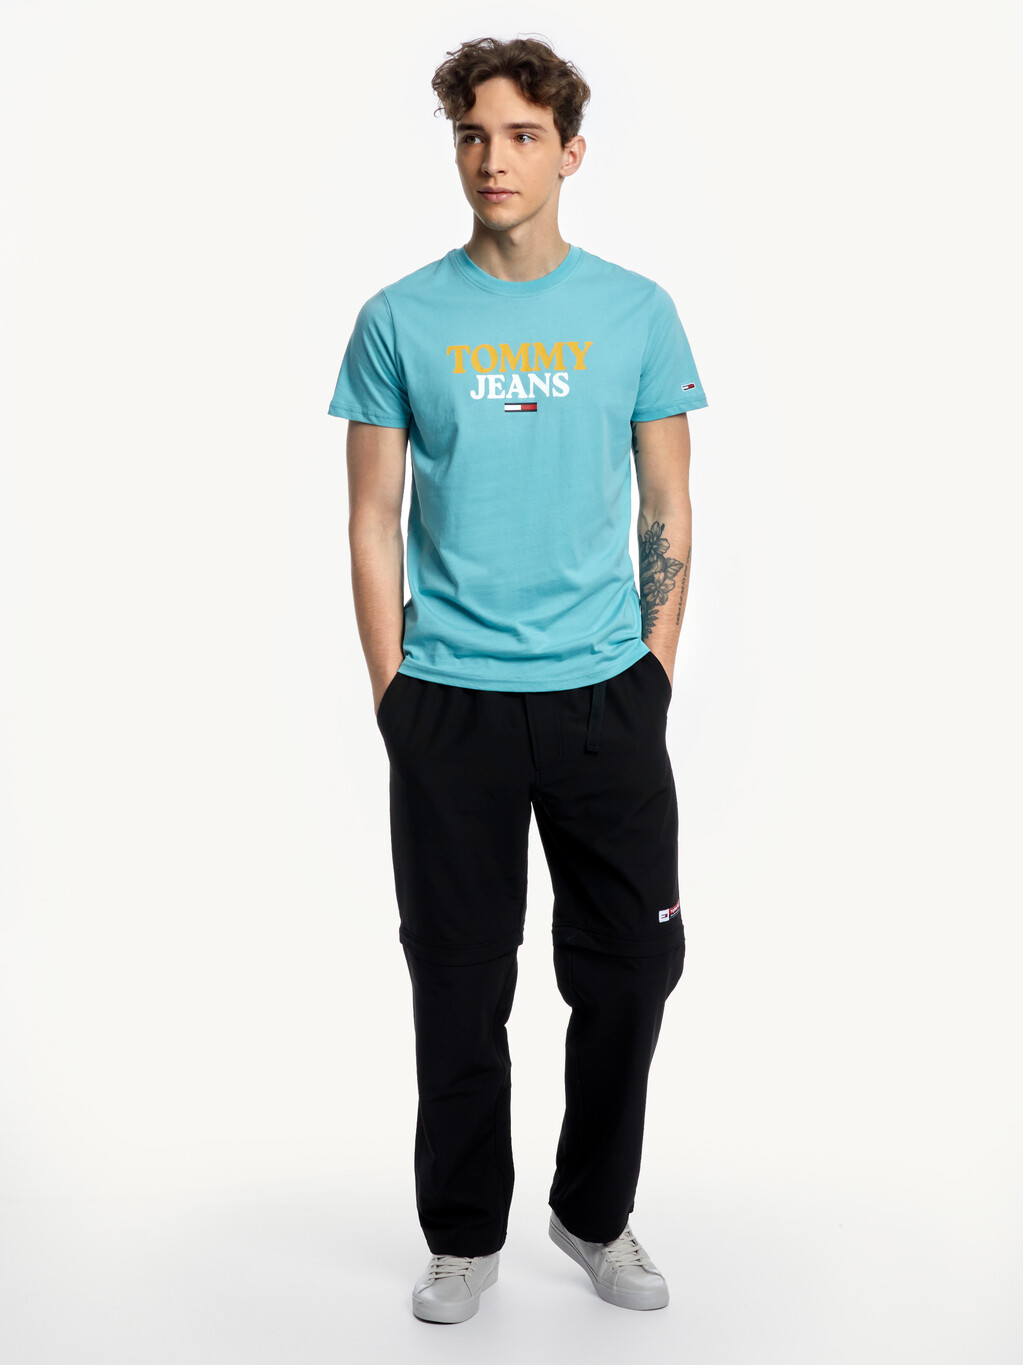 Buy TOMMY JEANS LOGO GRAPHIC T-SHIRT in color CREST